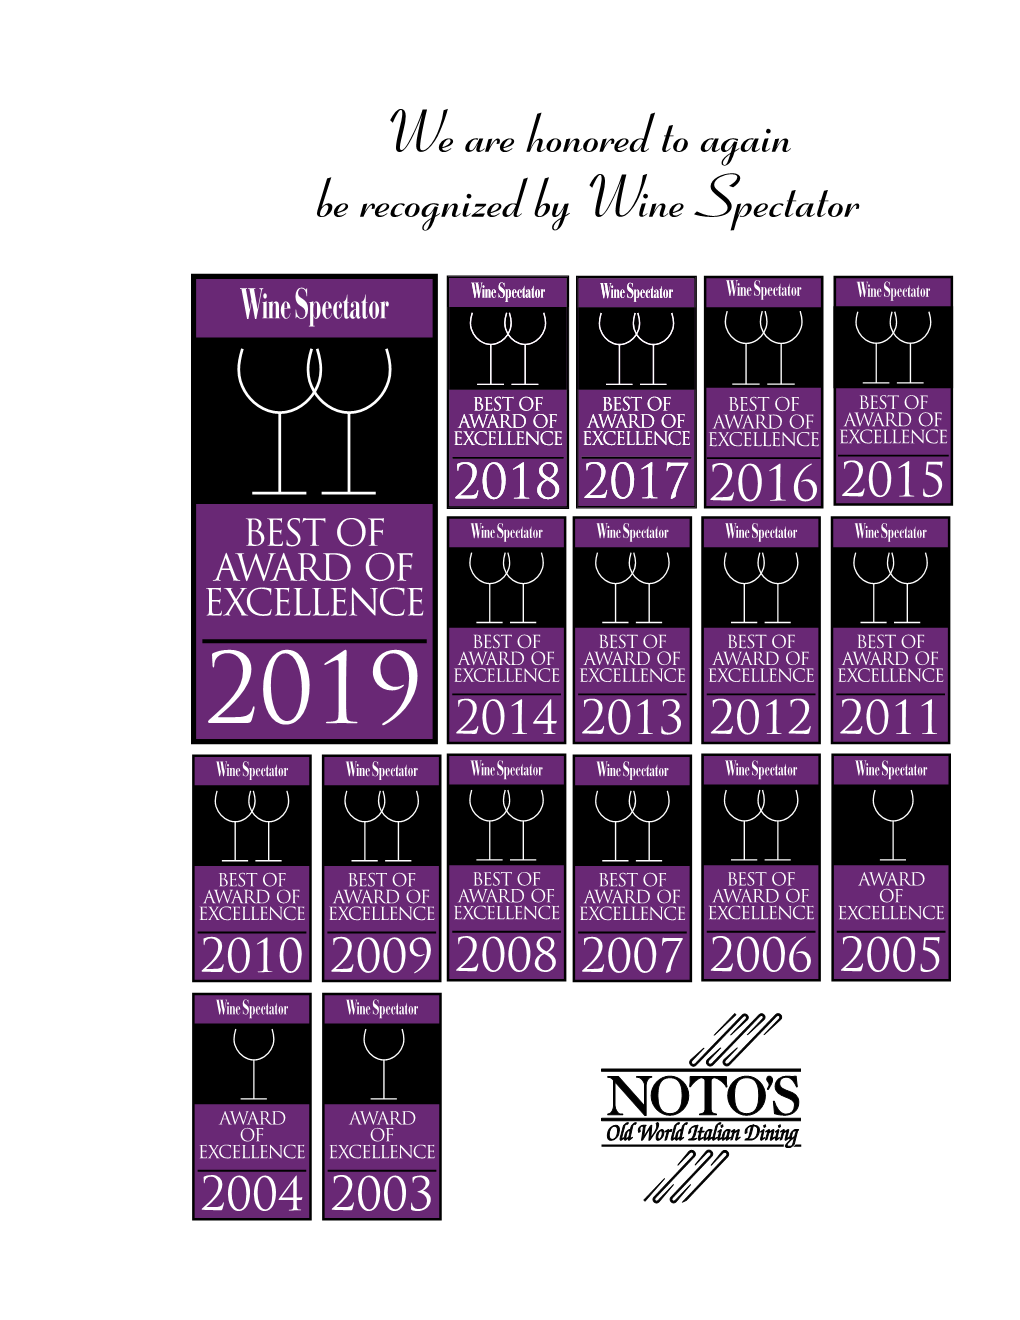 We Are Honored to Again Be Recognized by Wine Spectator